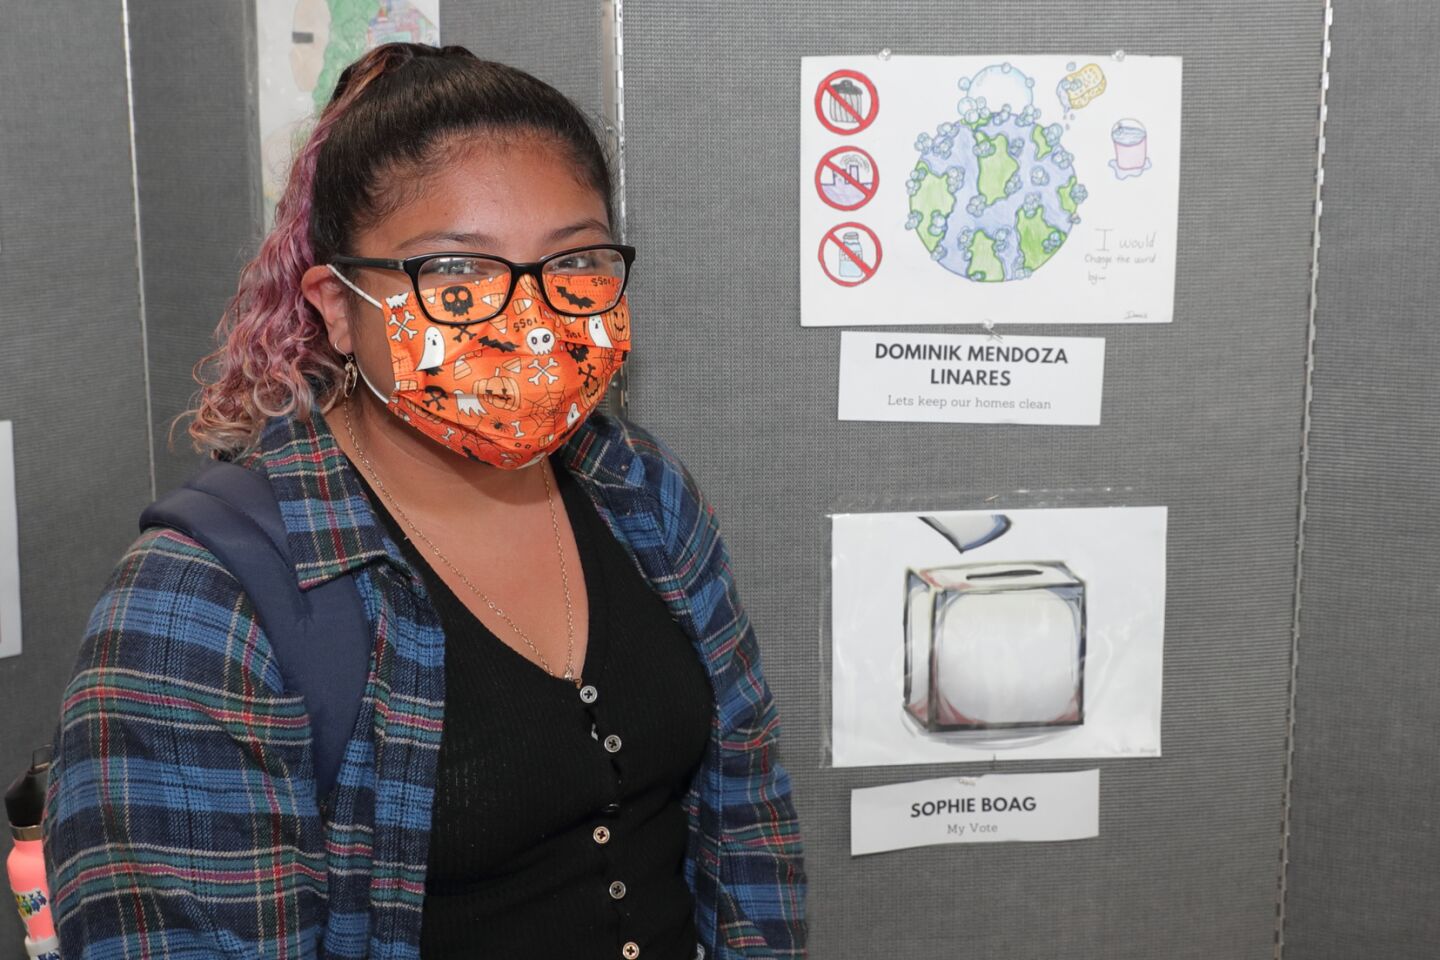 Dominik Mendoza LInares with her entry "Let's Keep Our Homes Clean"